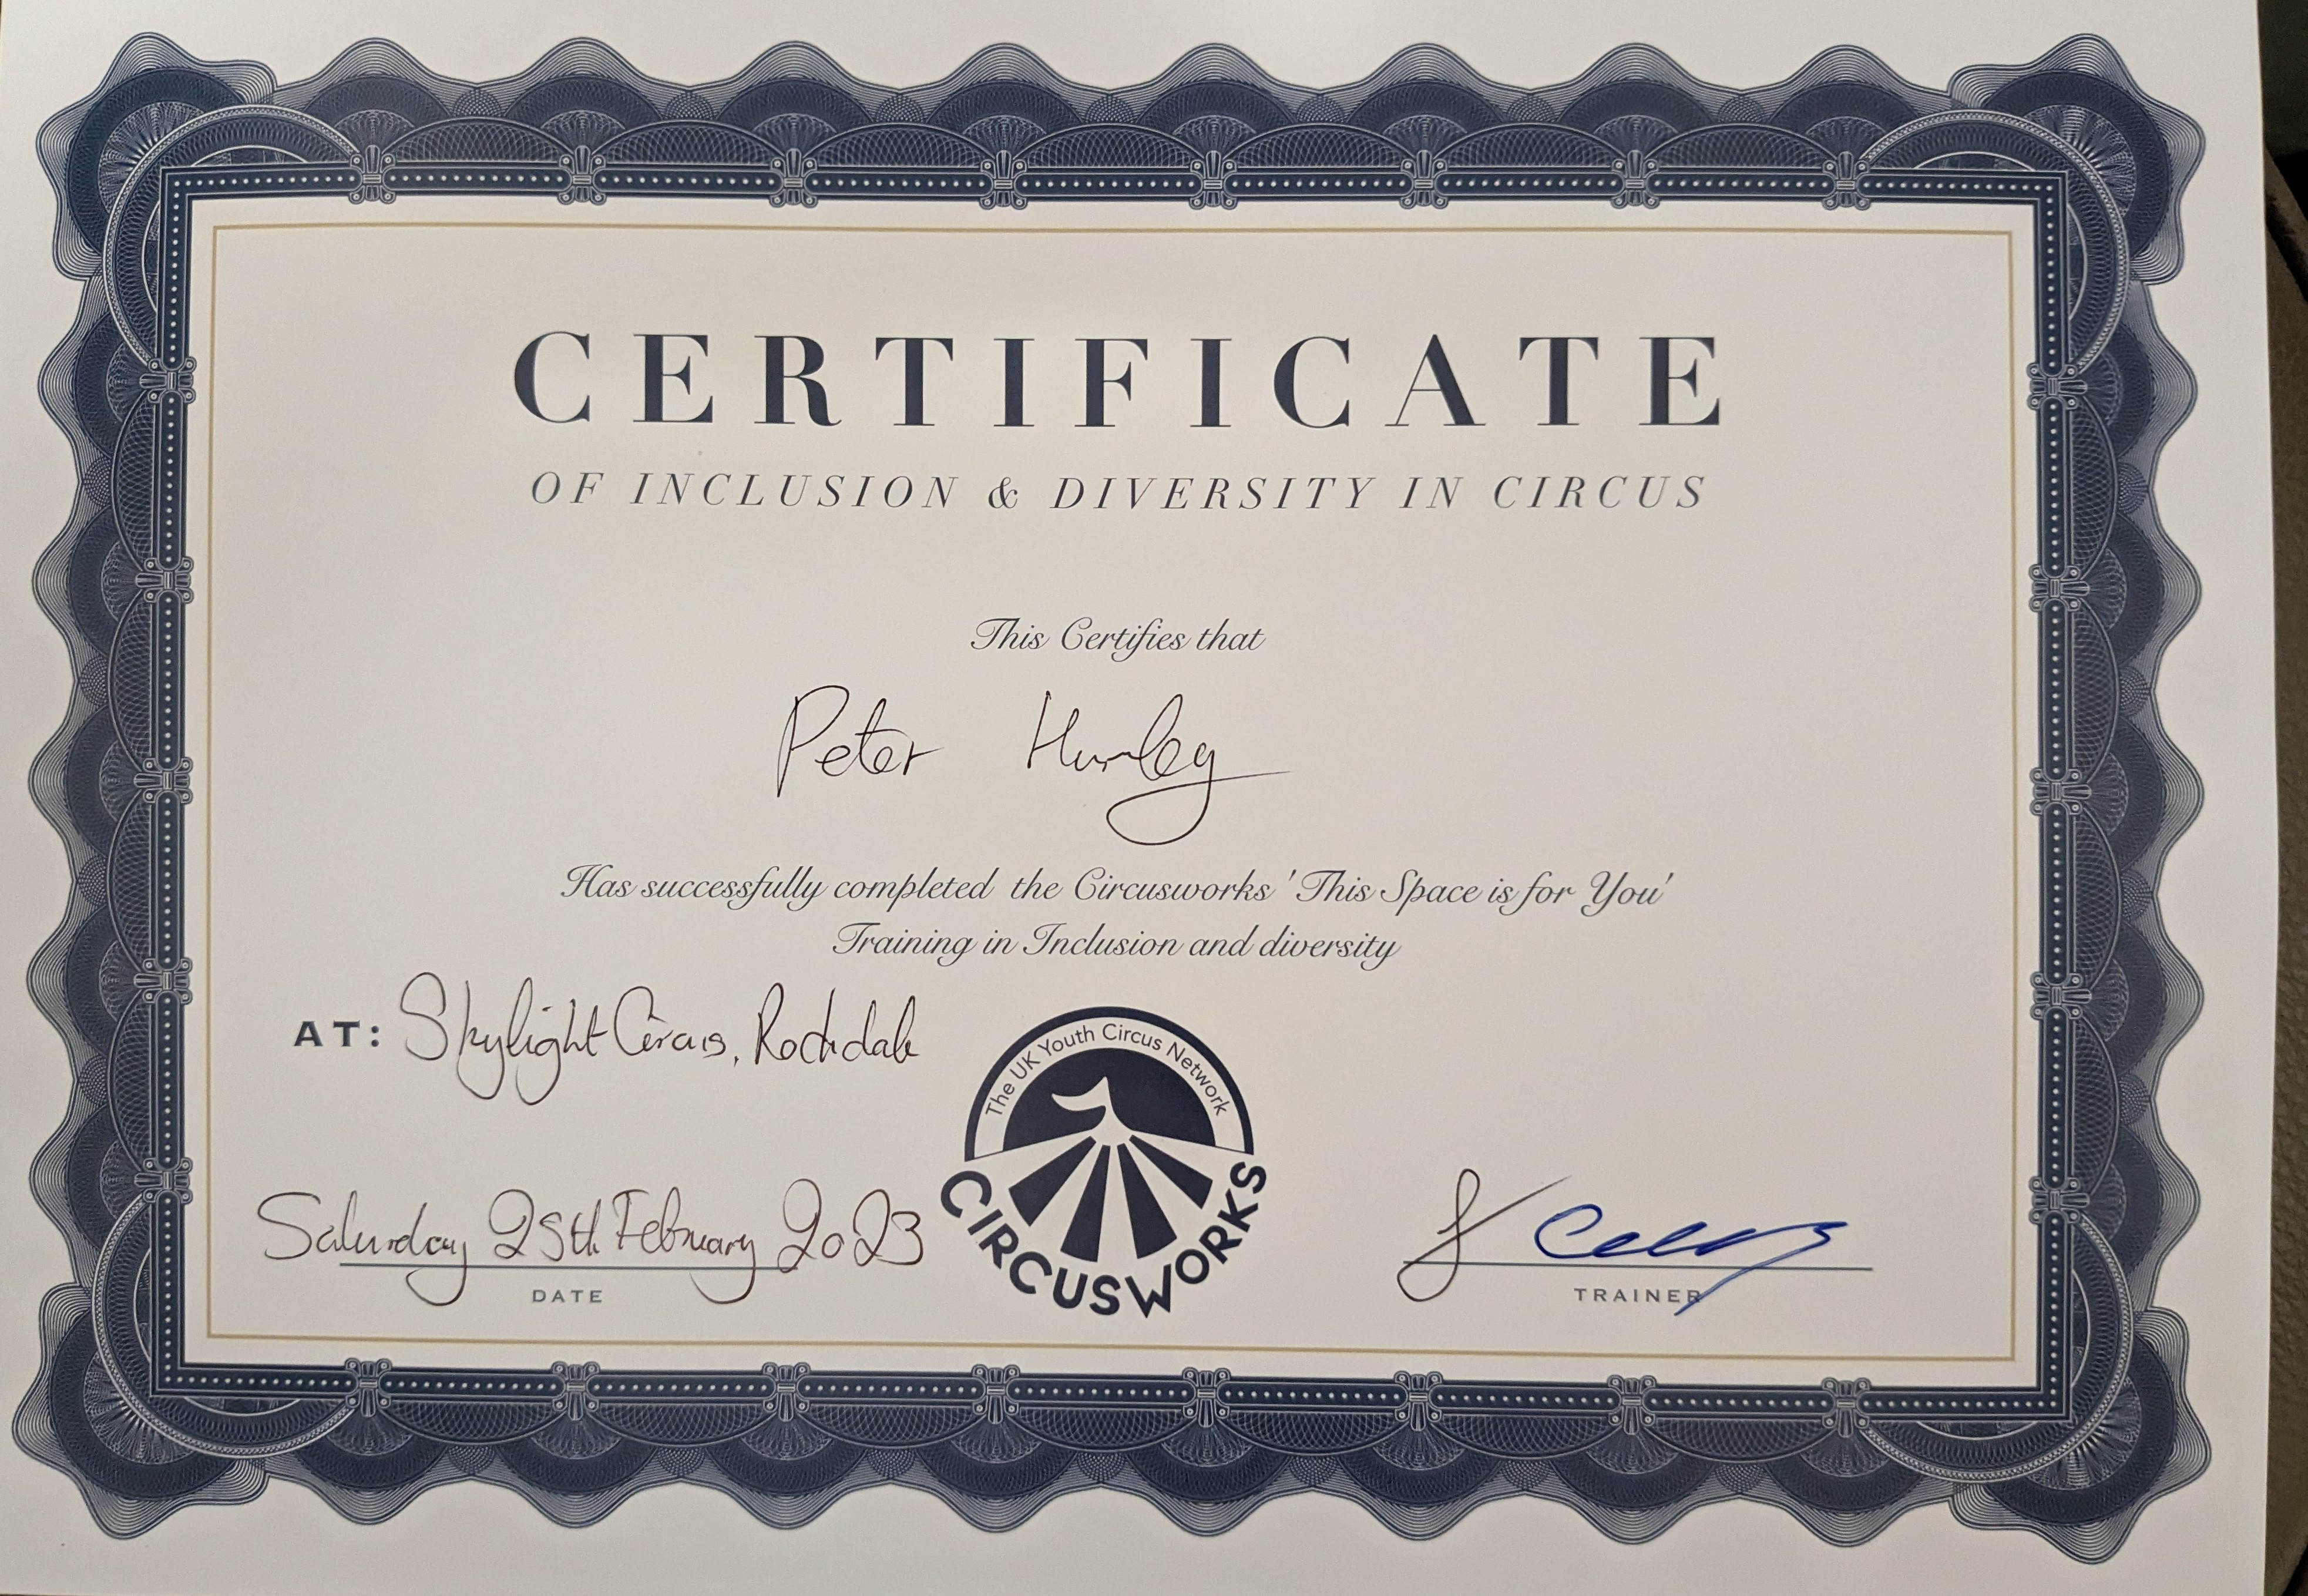 Inclusion and Diversity Training Certificate